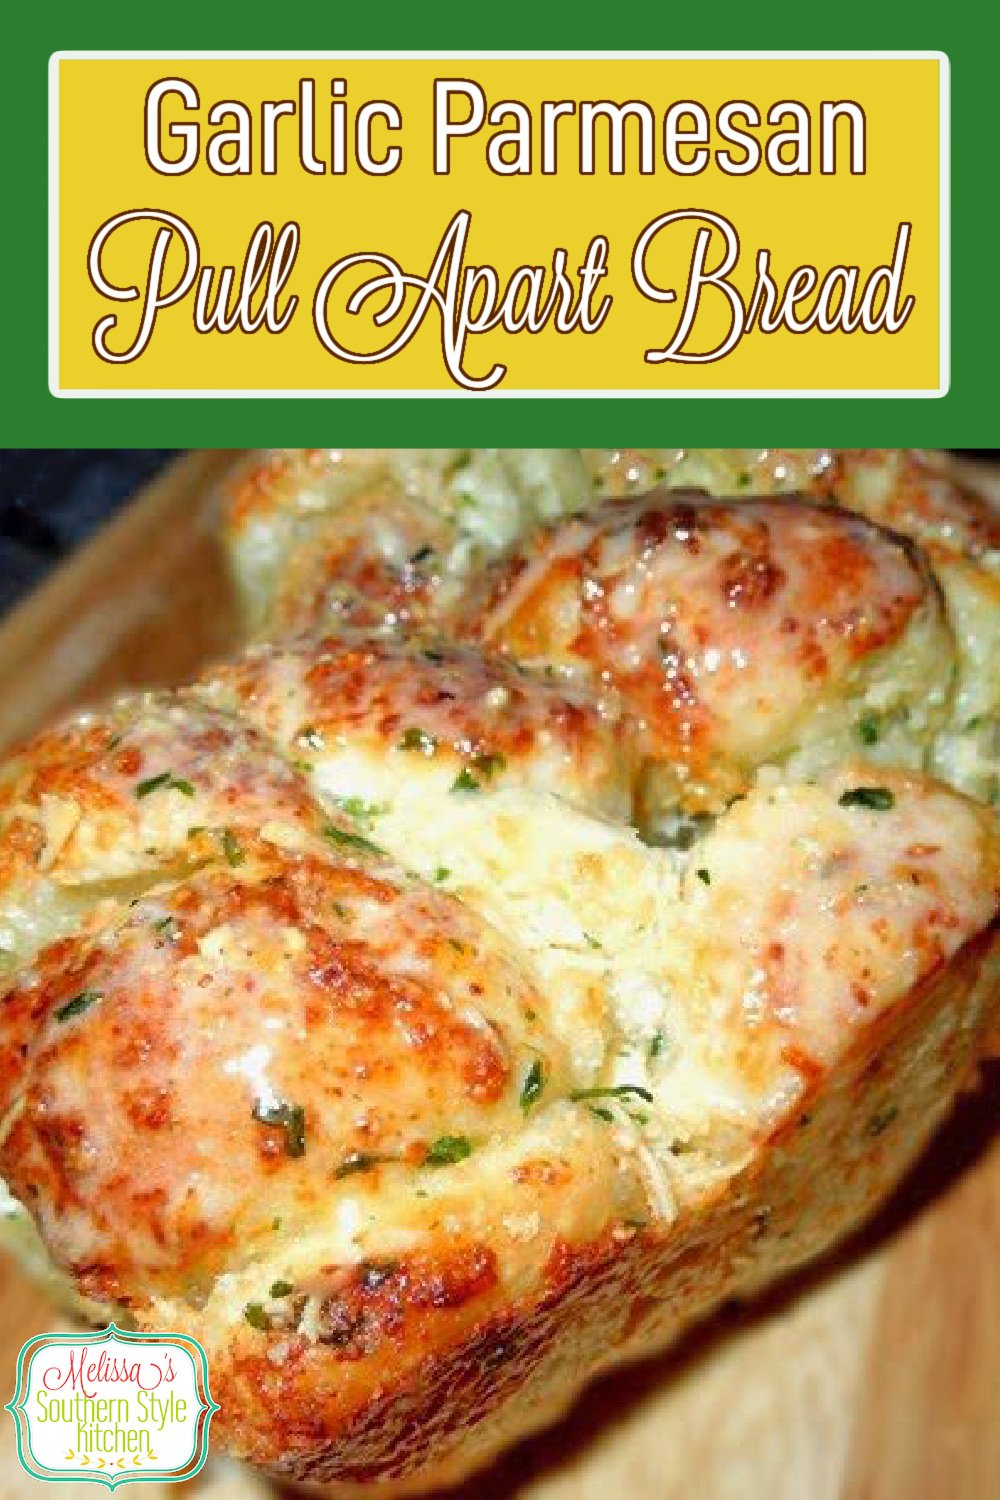 This easy buttery Garlic Parmesan Pull Apart Bread is impossible to resist #garlicbread #pullapartbread #breadrecipes #frozenbread #rolls #garlicbutter #southernrecipes #breads #bestbreadrecipes #garlicparmesanpullapartbread